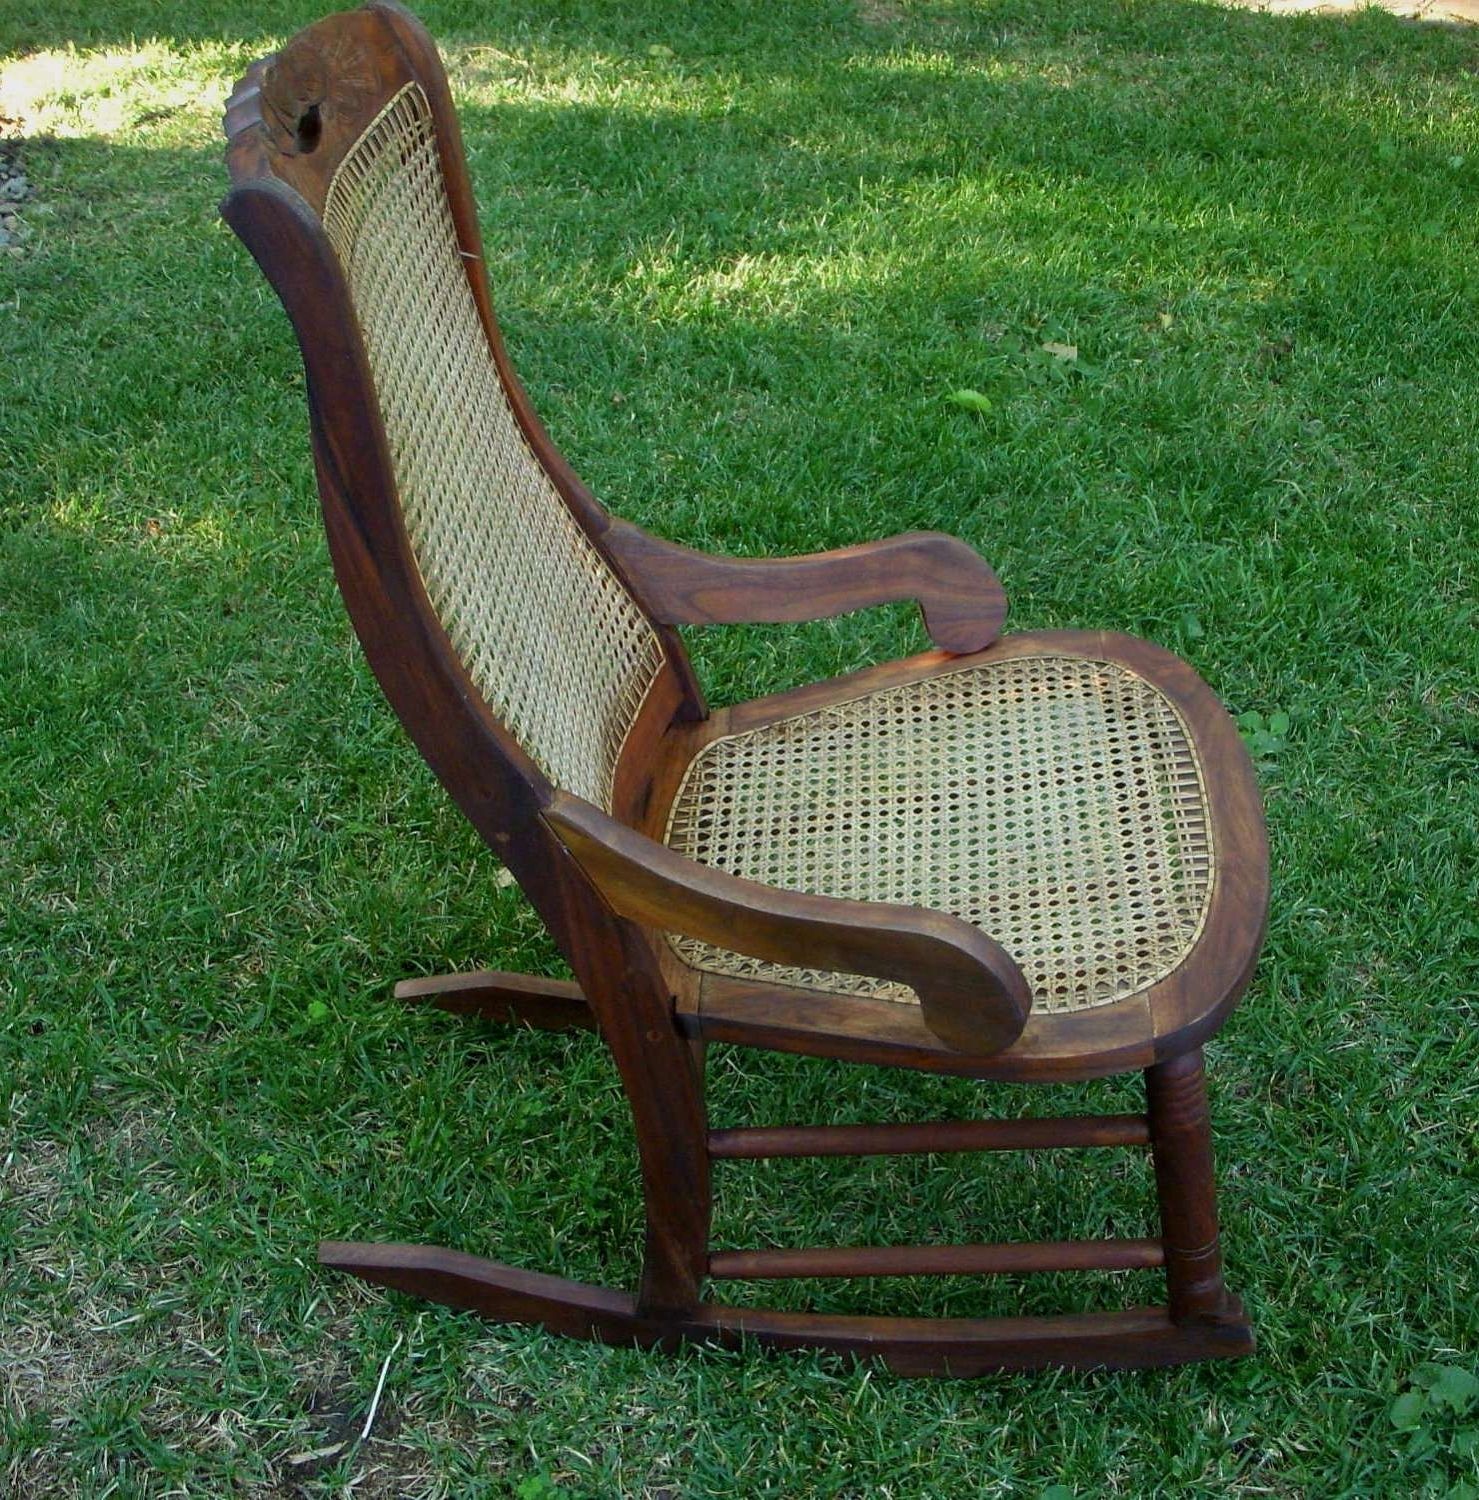 20 New Antique Wicker Rocking Chair (View 13 of 20)